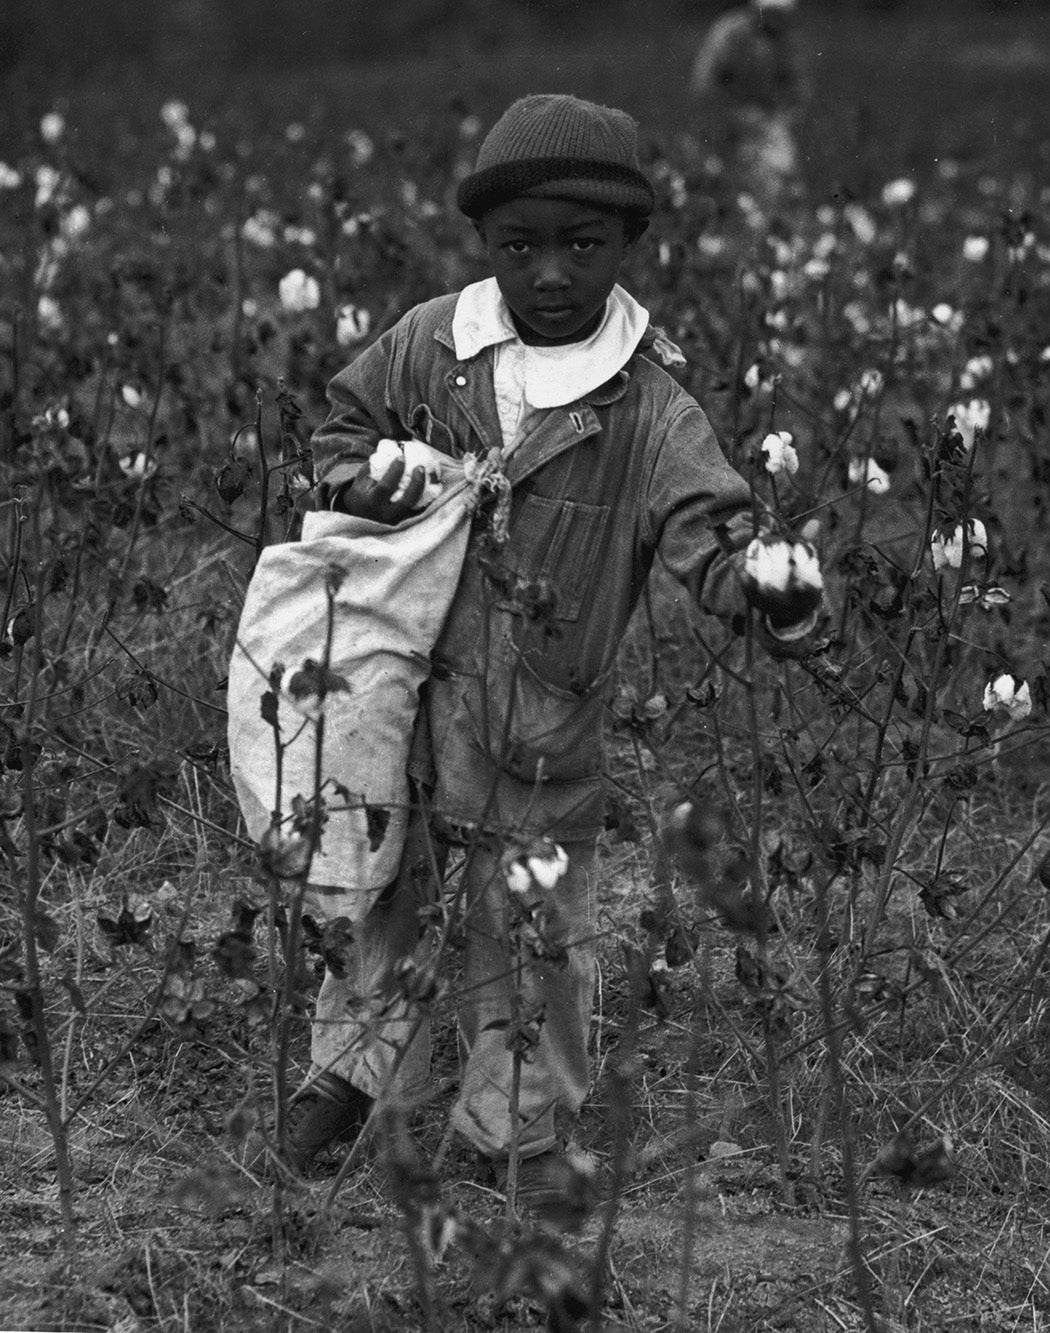 A young boy picking cotton in a cotton field, c. 1935